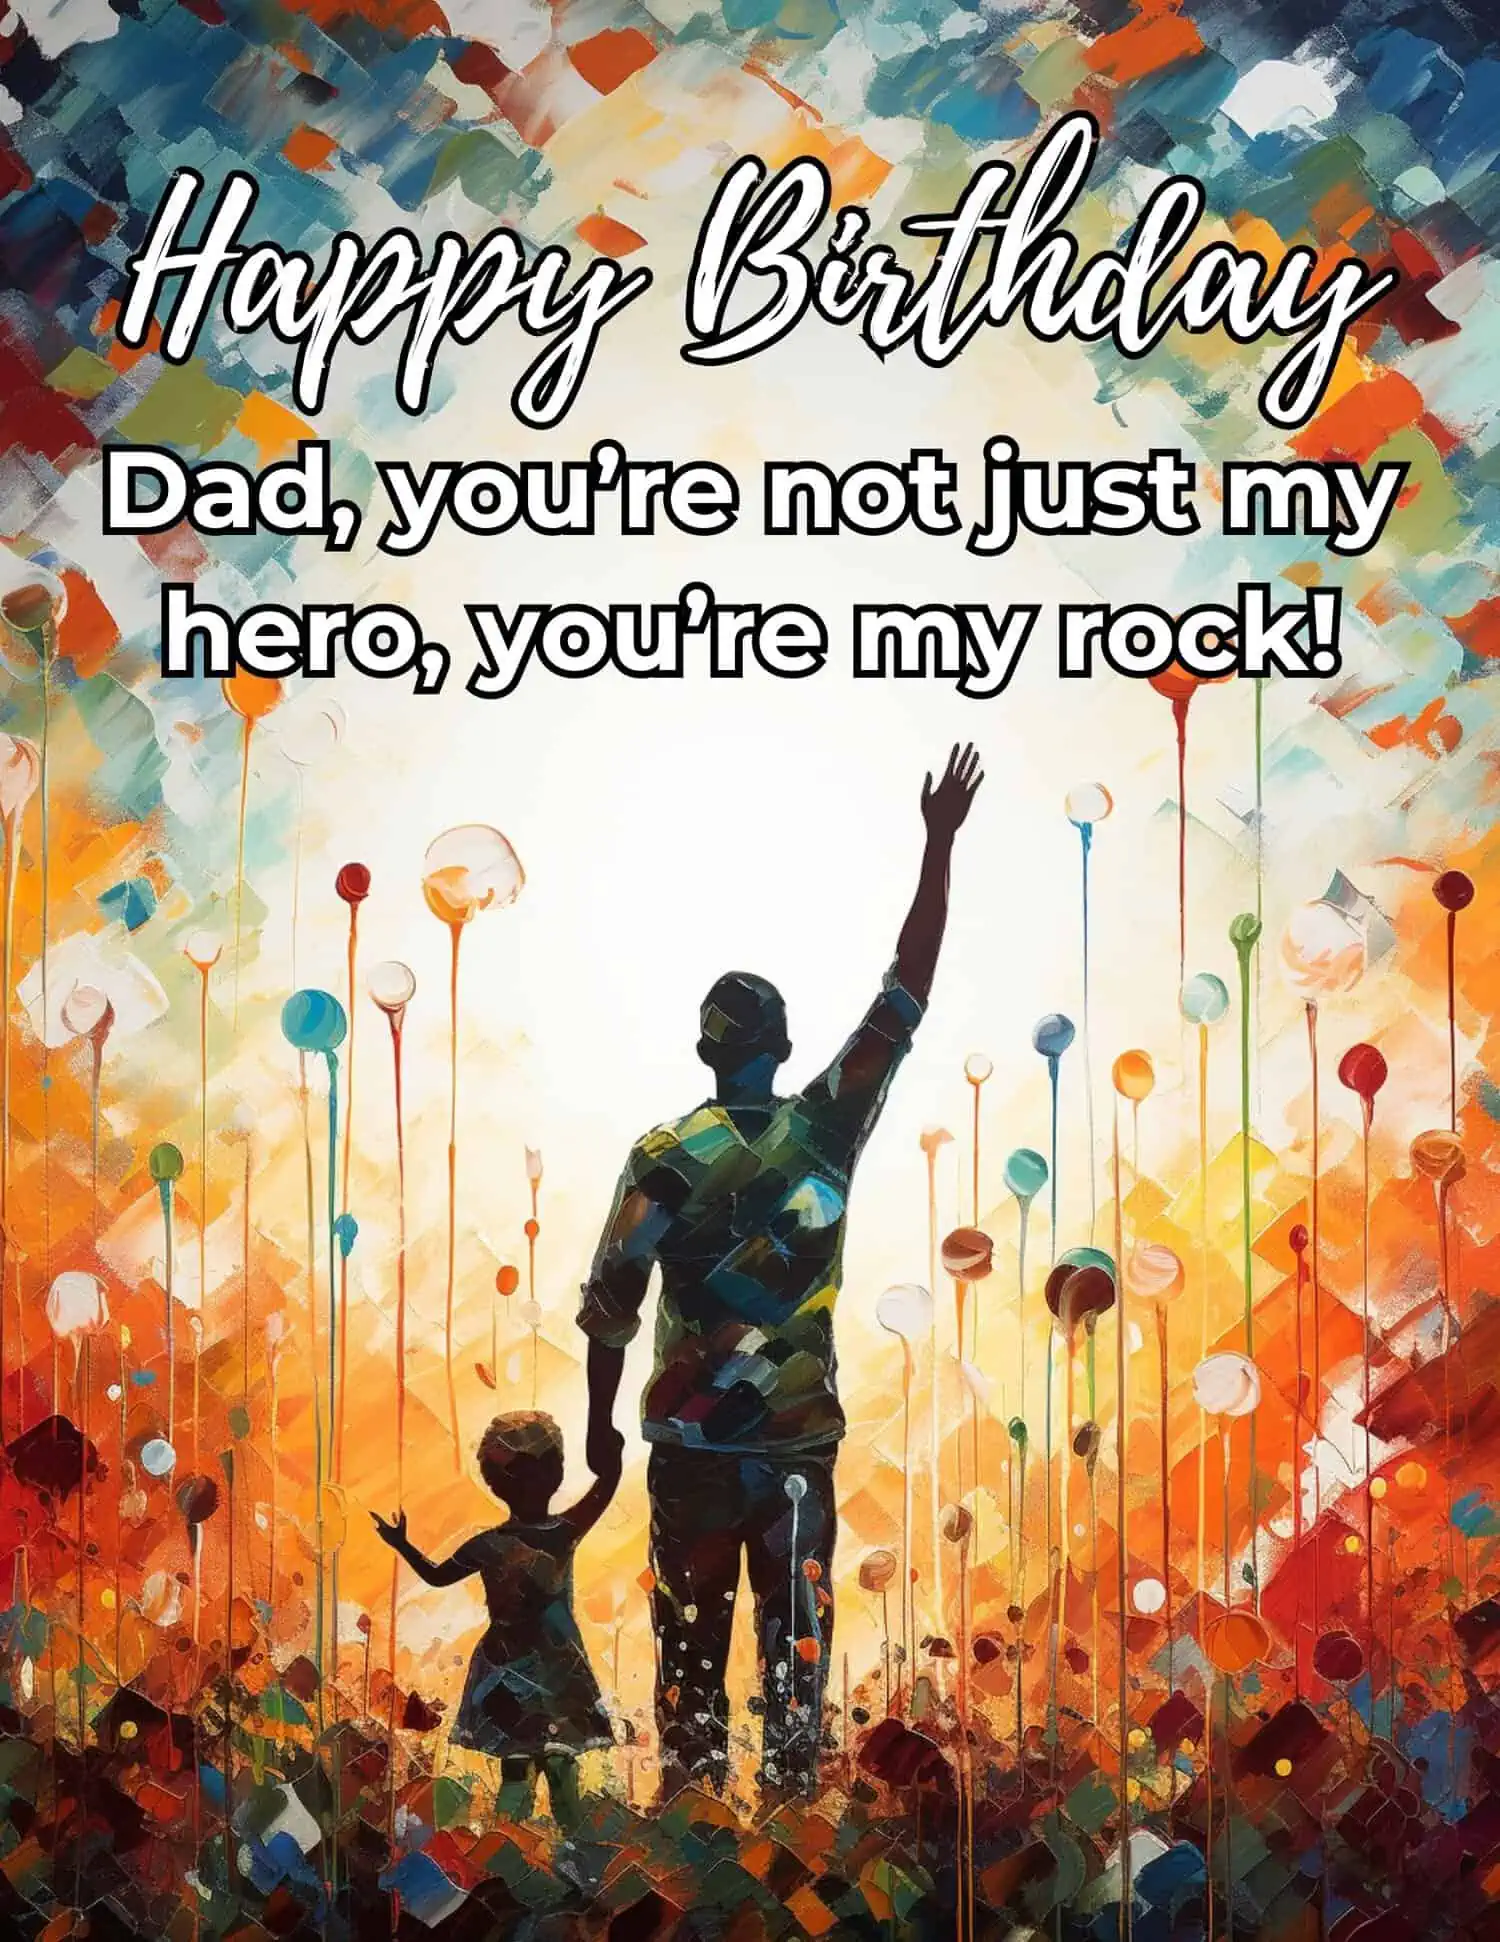 Emotional and heartfelt birthday wishes from a daughter to her dad.